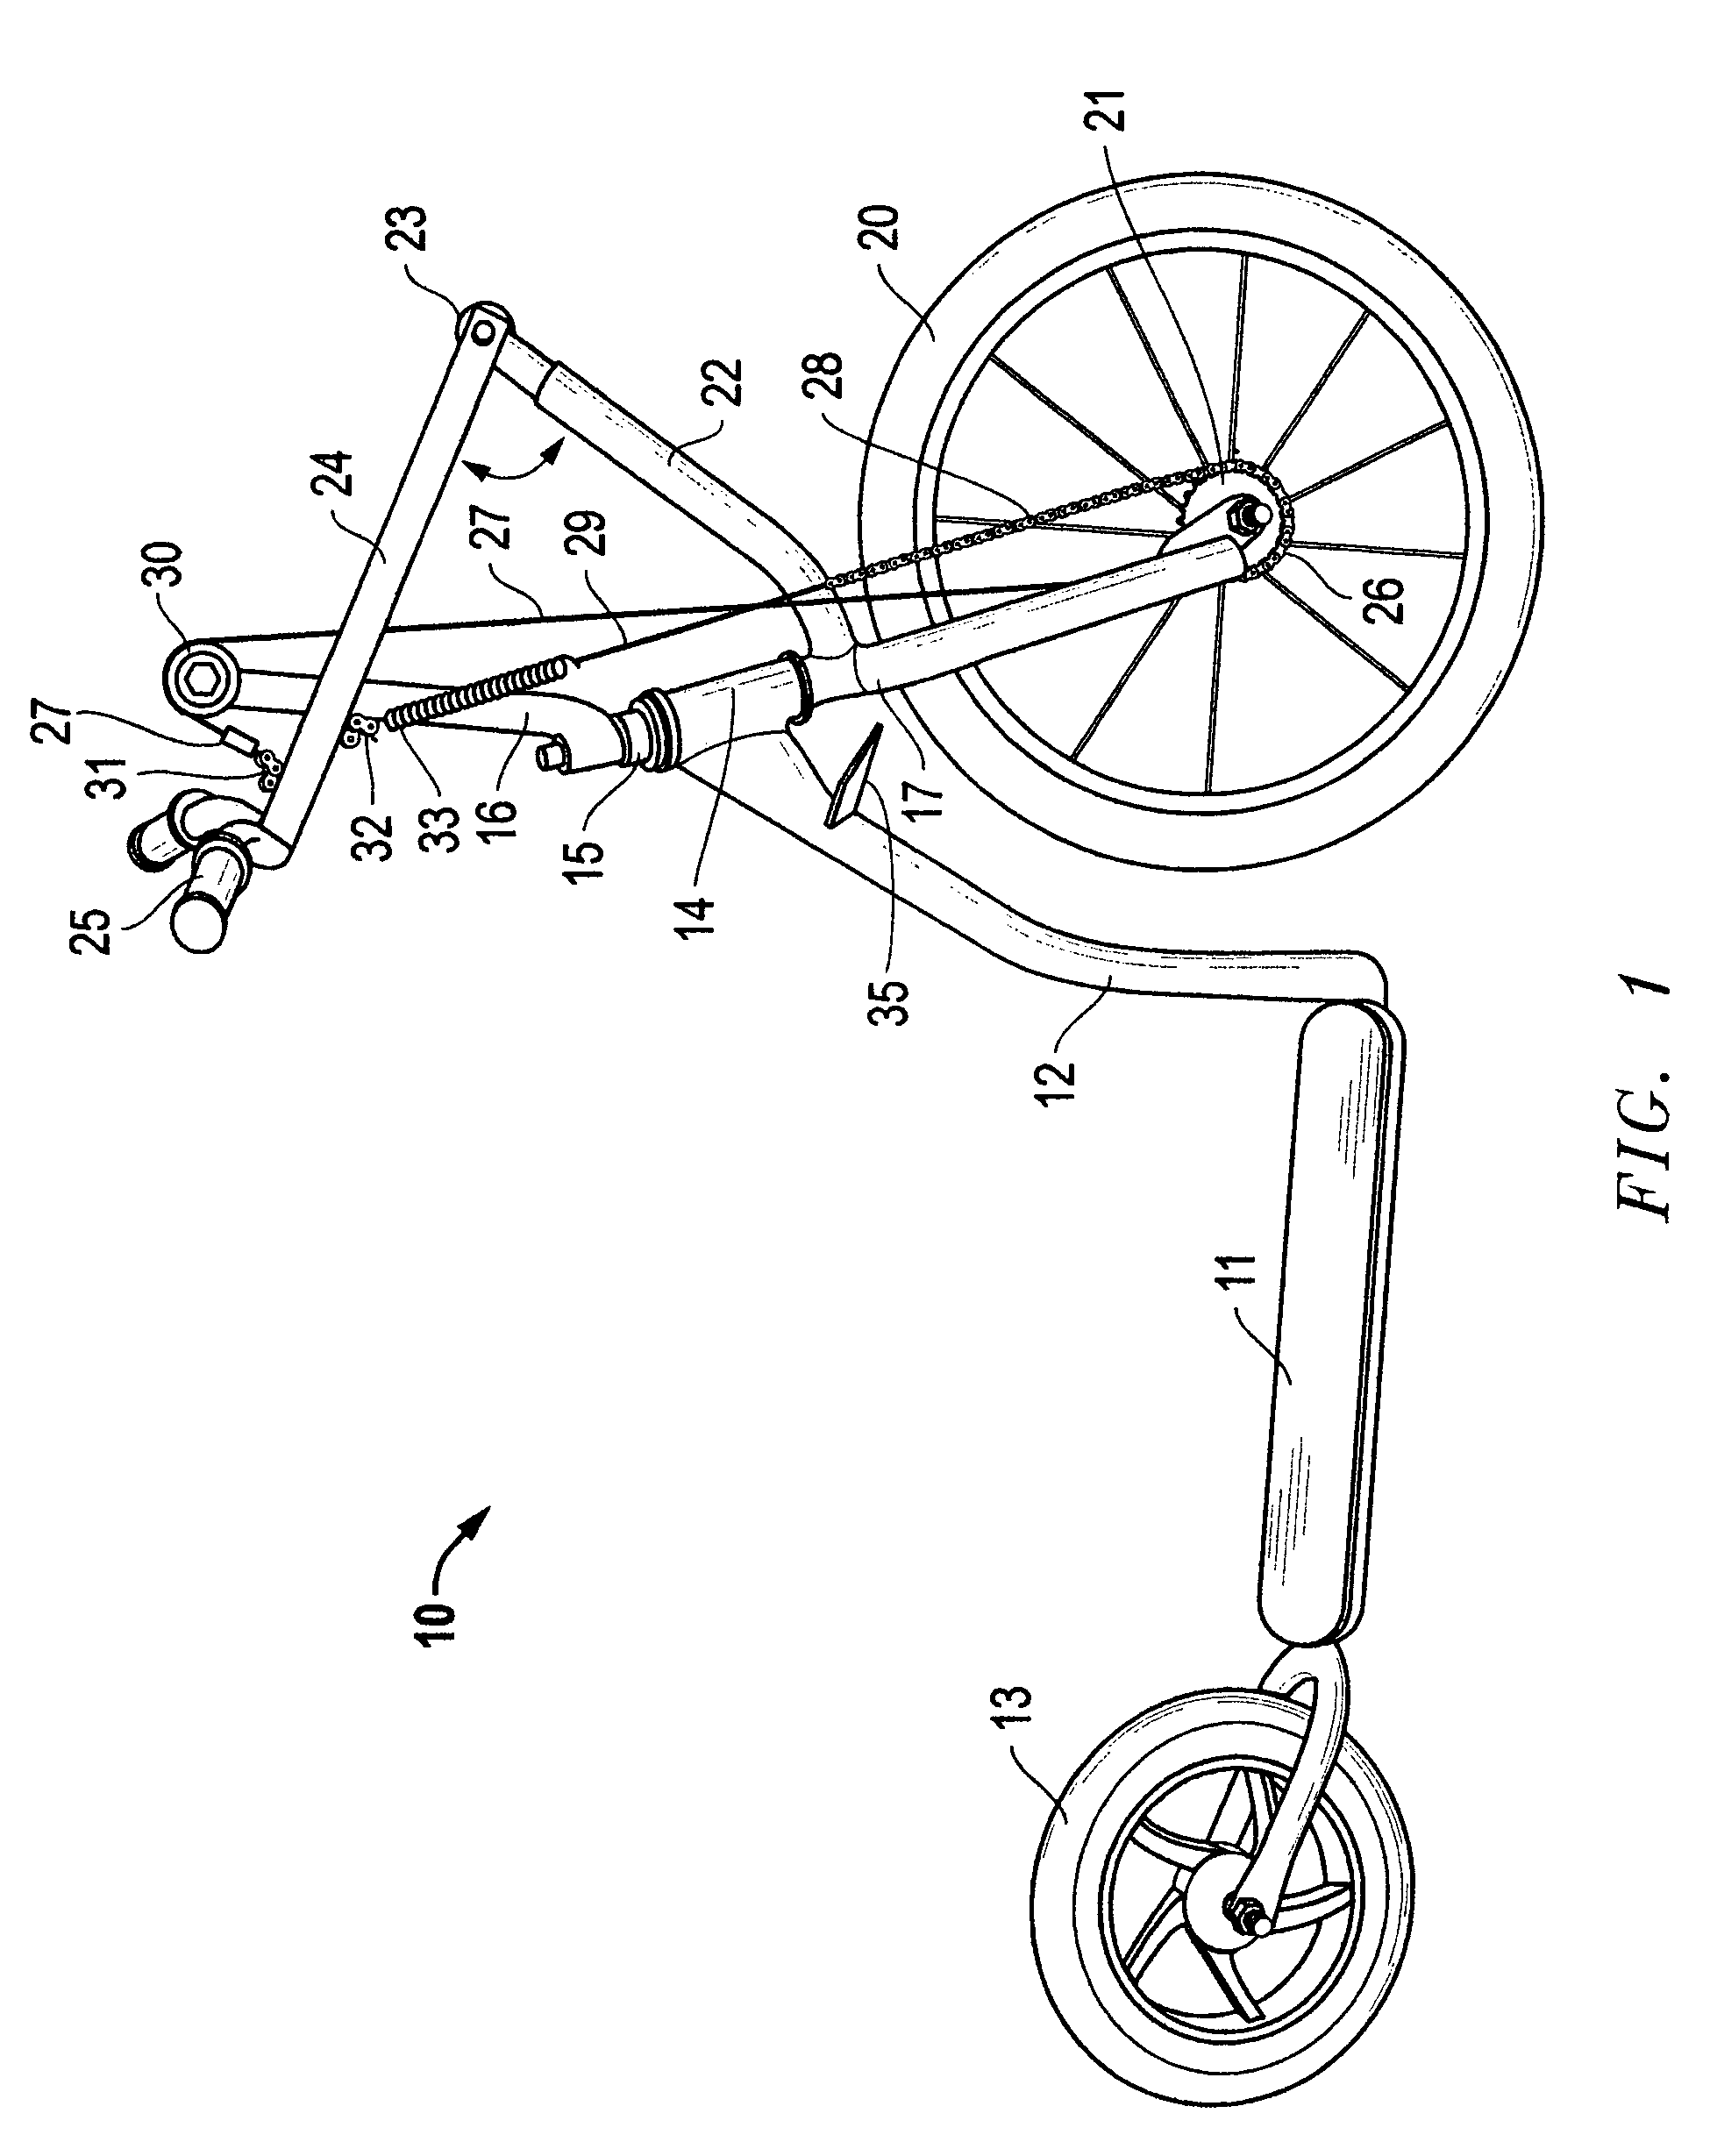 Apparatus for hand propulsion and steering of a scooter, tricycle or bicycle